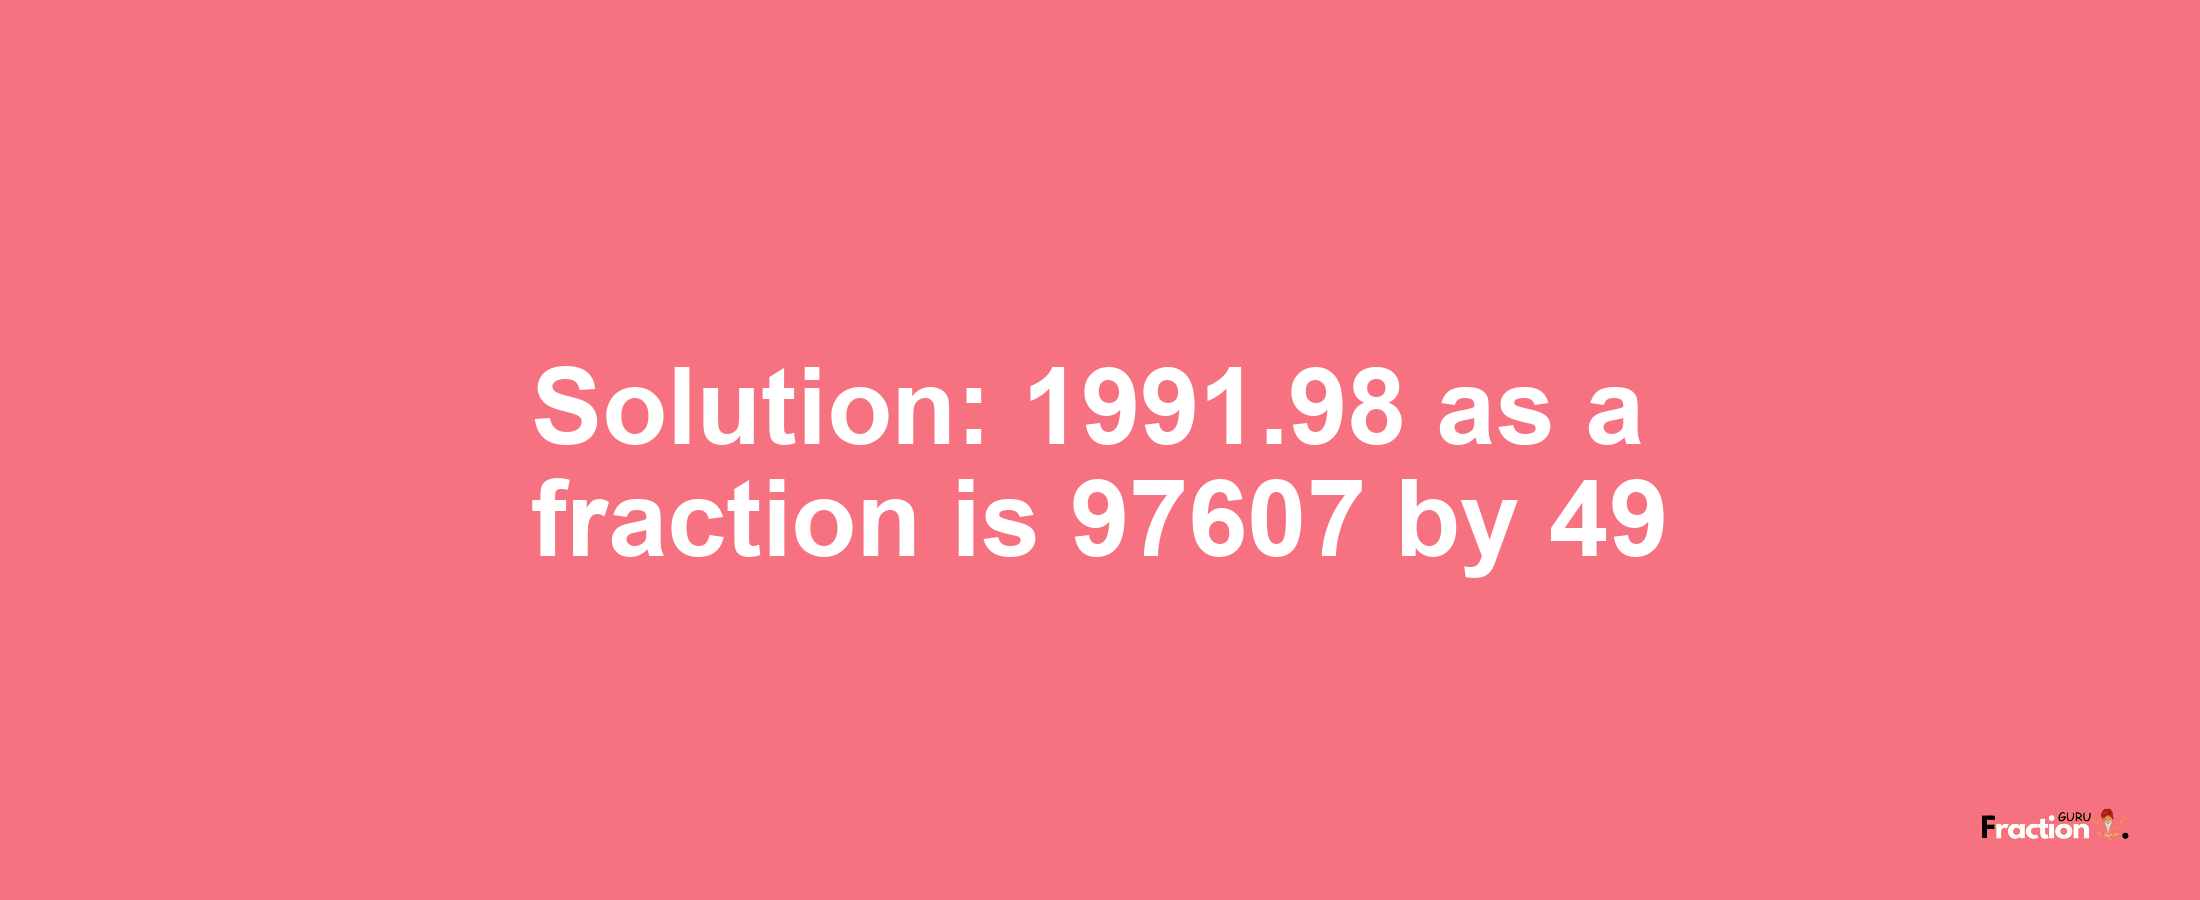 Solution:1991.98 as a fraction is 97607/49